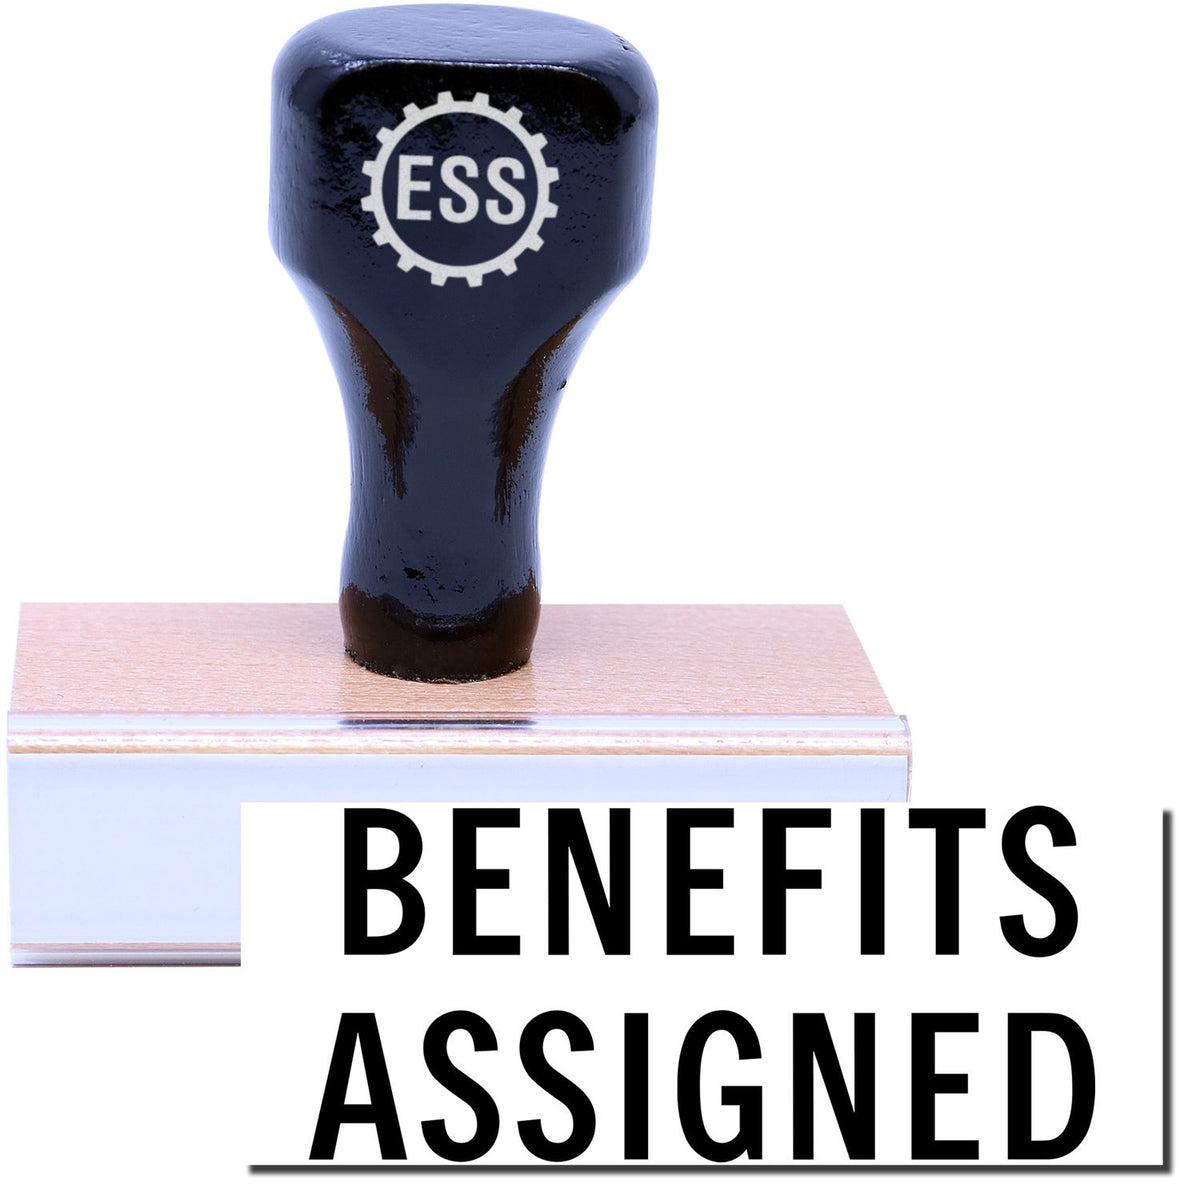 A stock office rubber stamp with a stamped image showing how the text &quot;BENEFITS ASSIGNED&quot; is displayed after stamping.